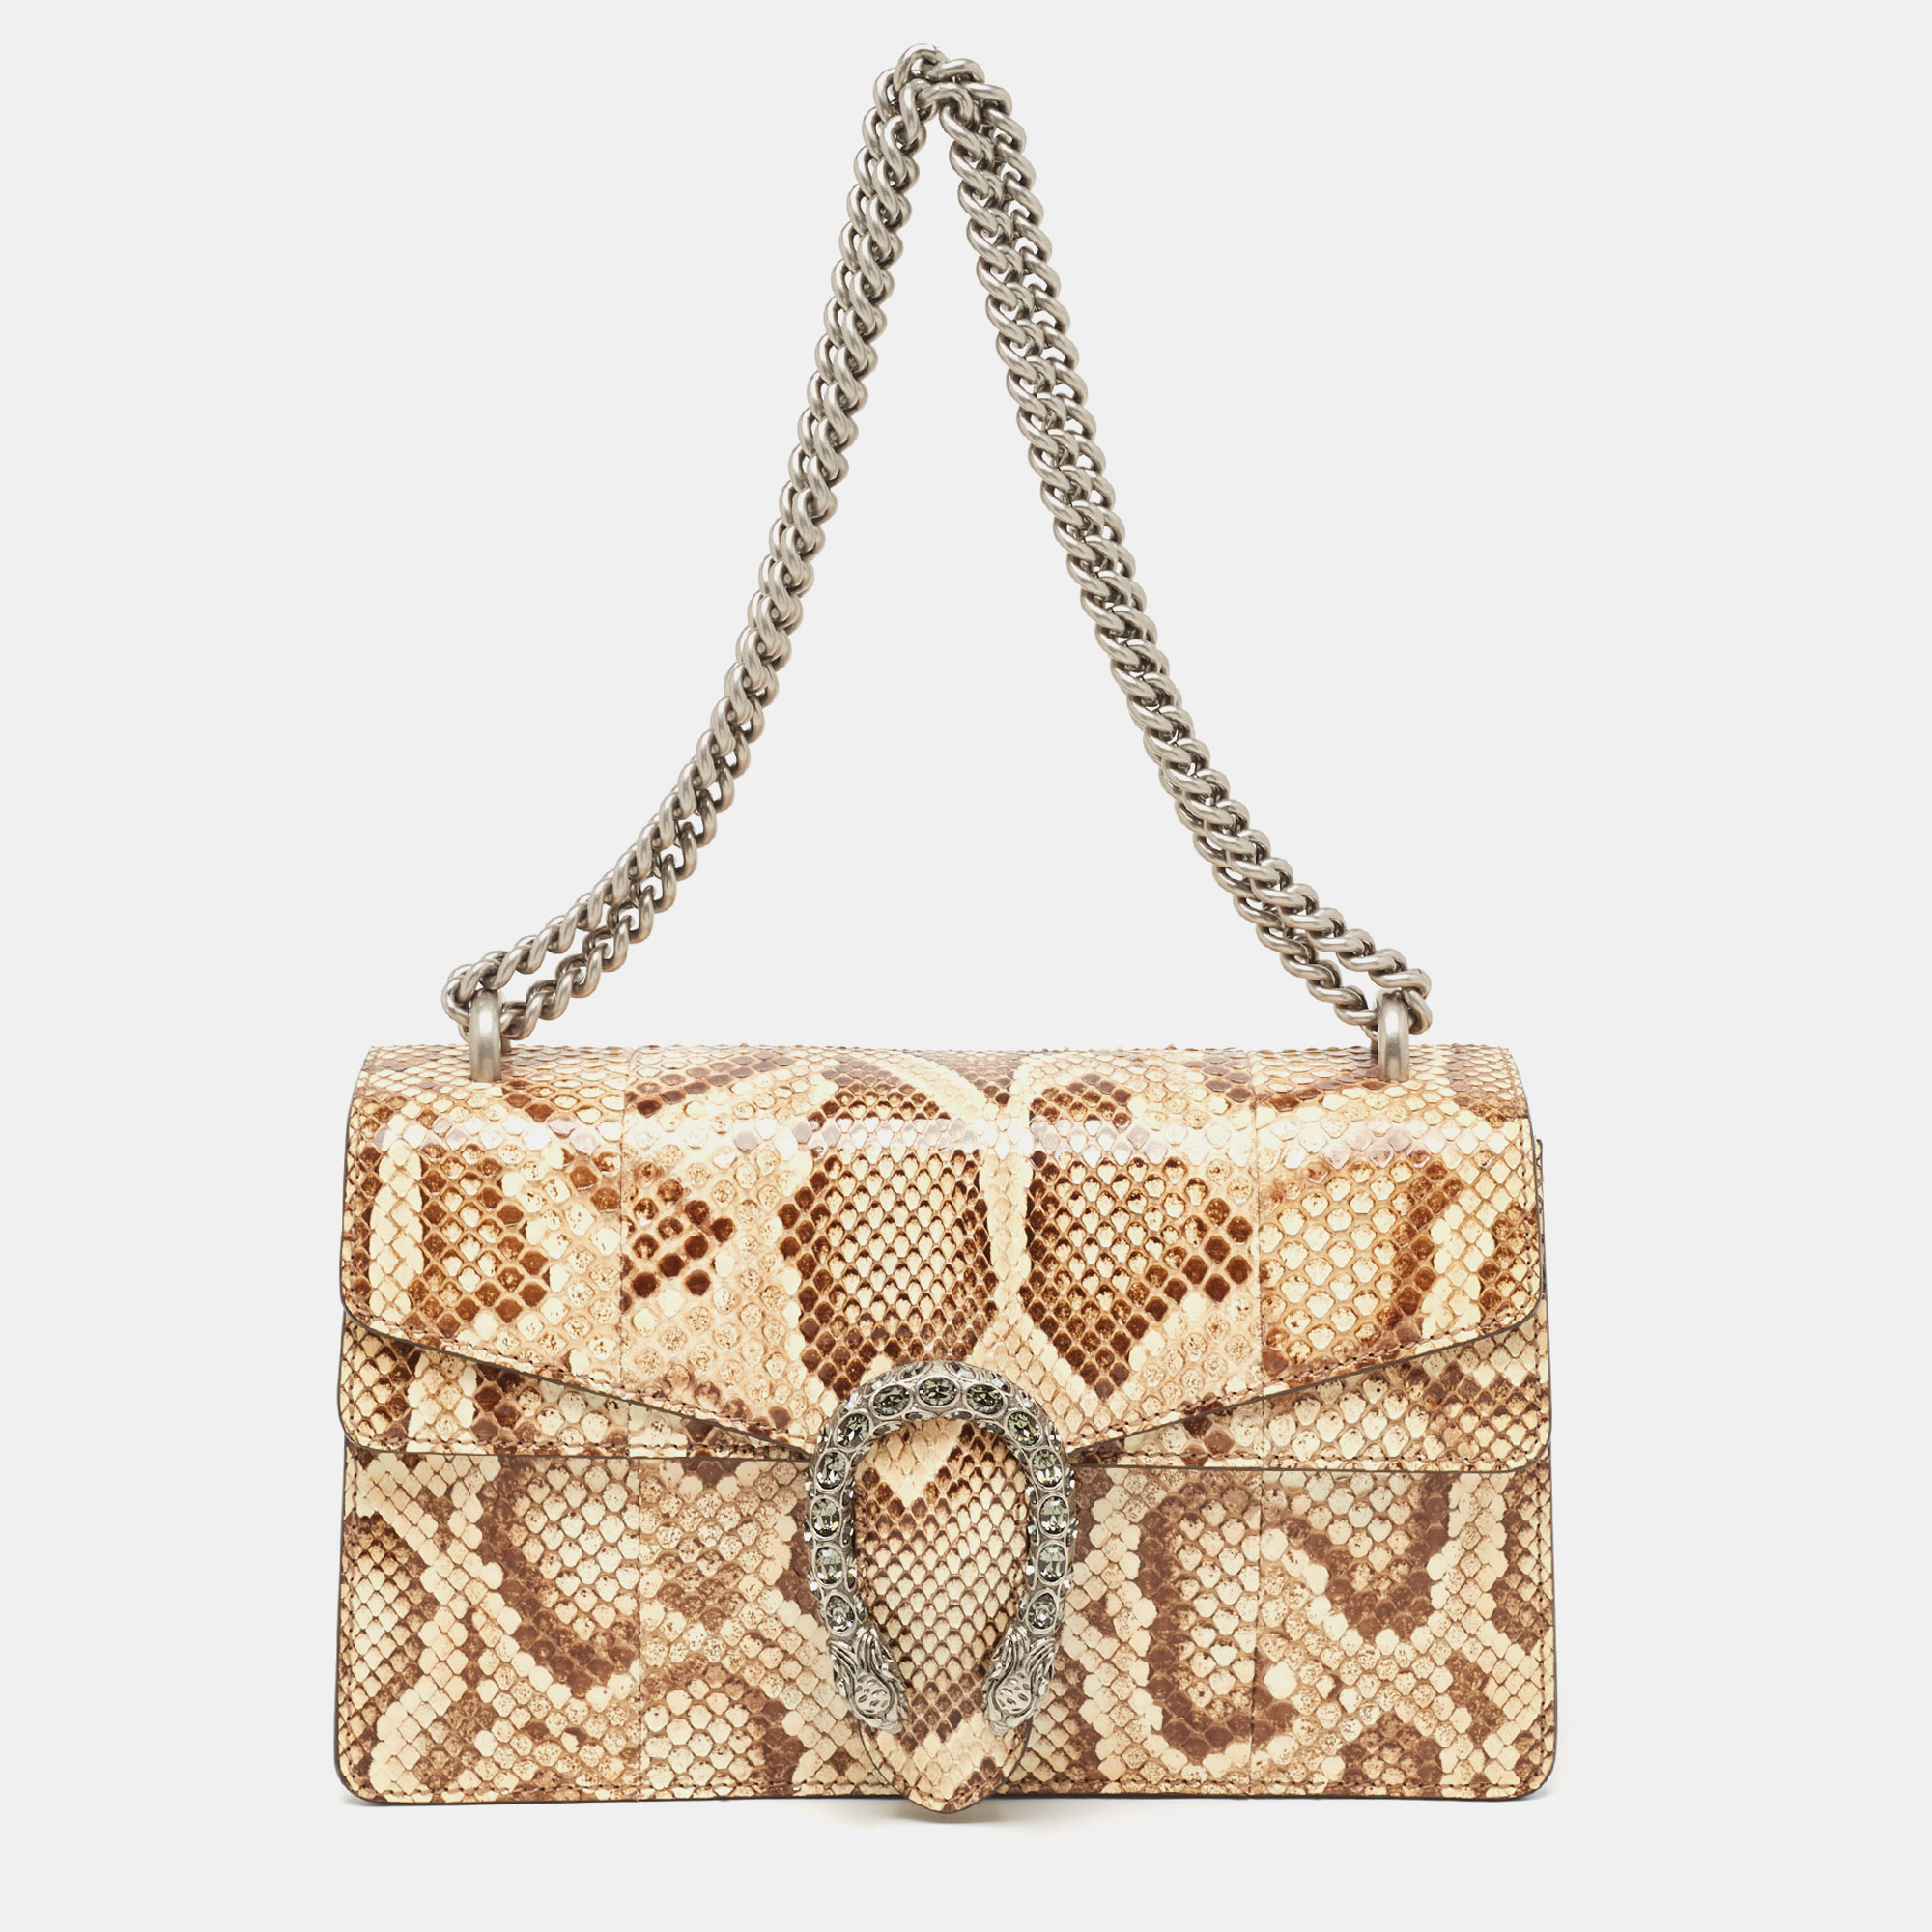 For a look that is complete with style taste and a touch of luxe this Gucci Dionysus bag is the perfect addition. Flaunt this beauty on your shoulder and revel in the taste of luxury it leaves you with.